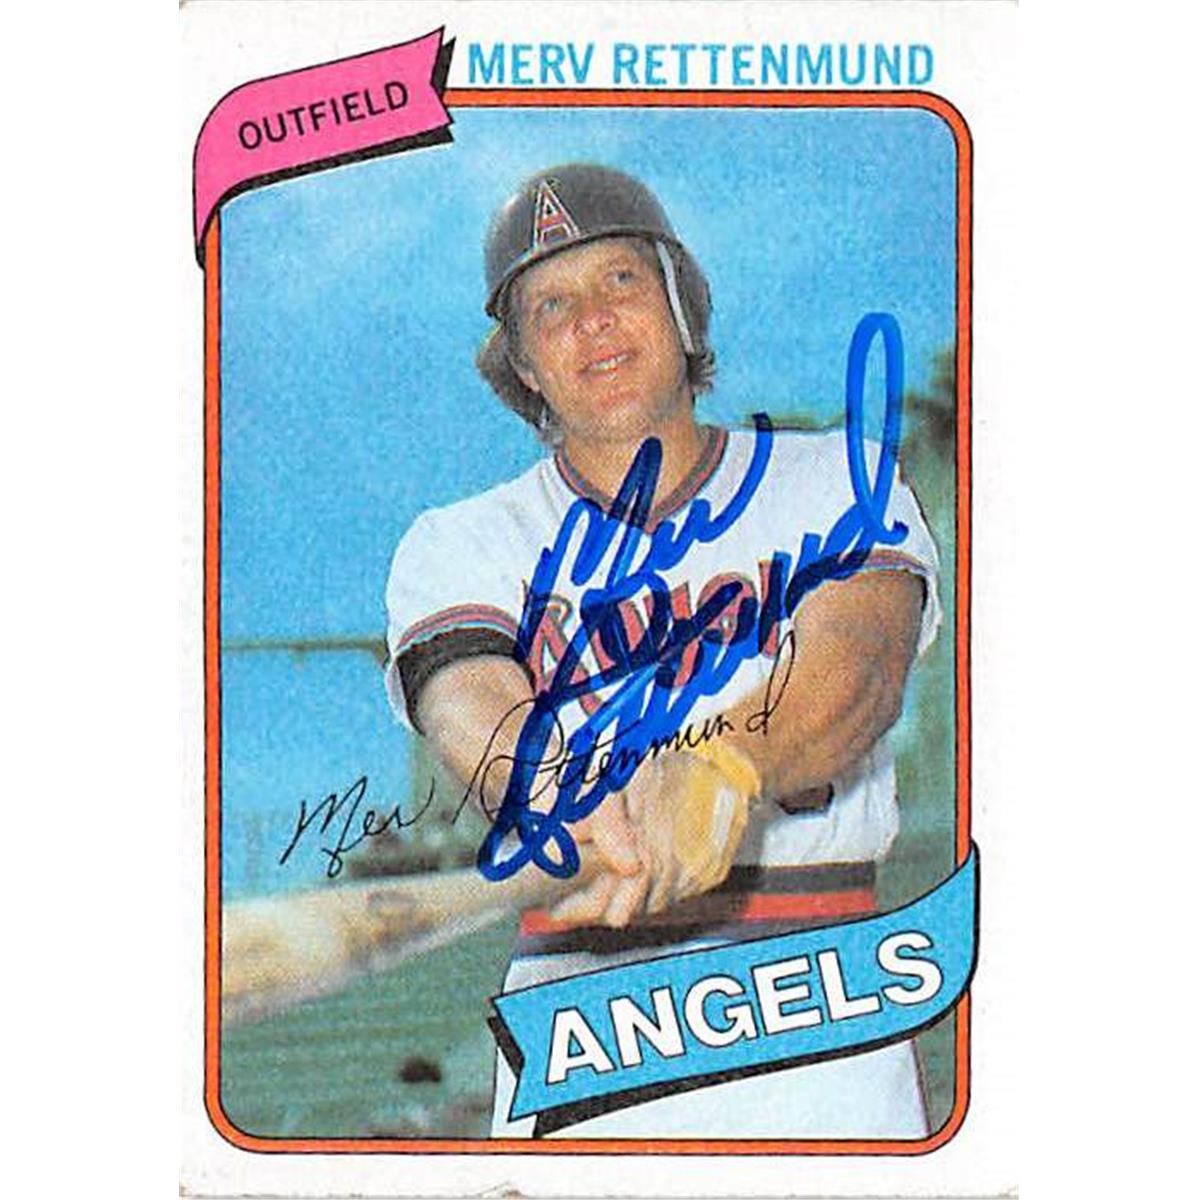 Picture of Autograph Warehouse 366195 Merv Rettenmund Autographed Baseball Card - California Angels 1980 Topps No.402